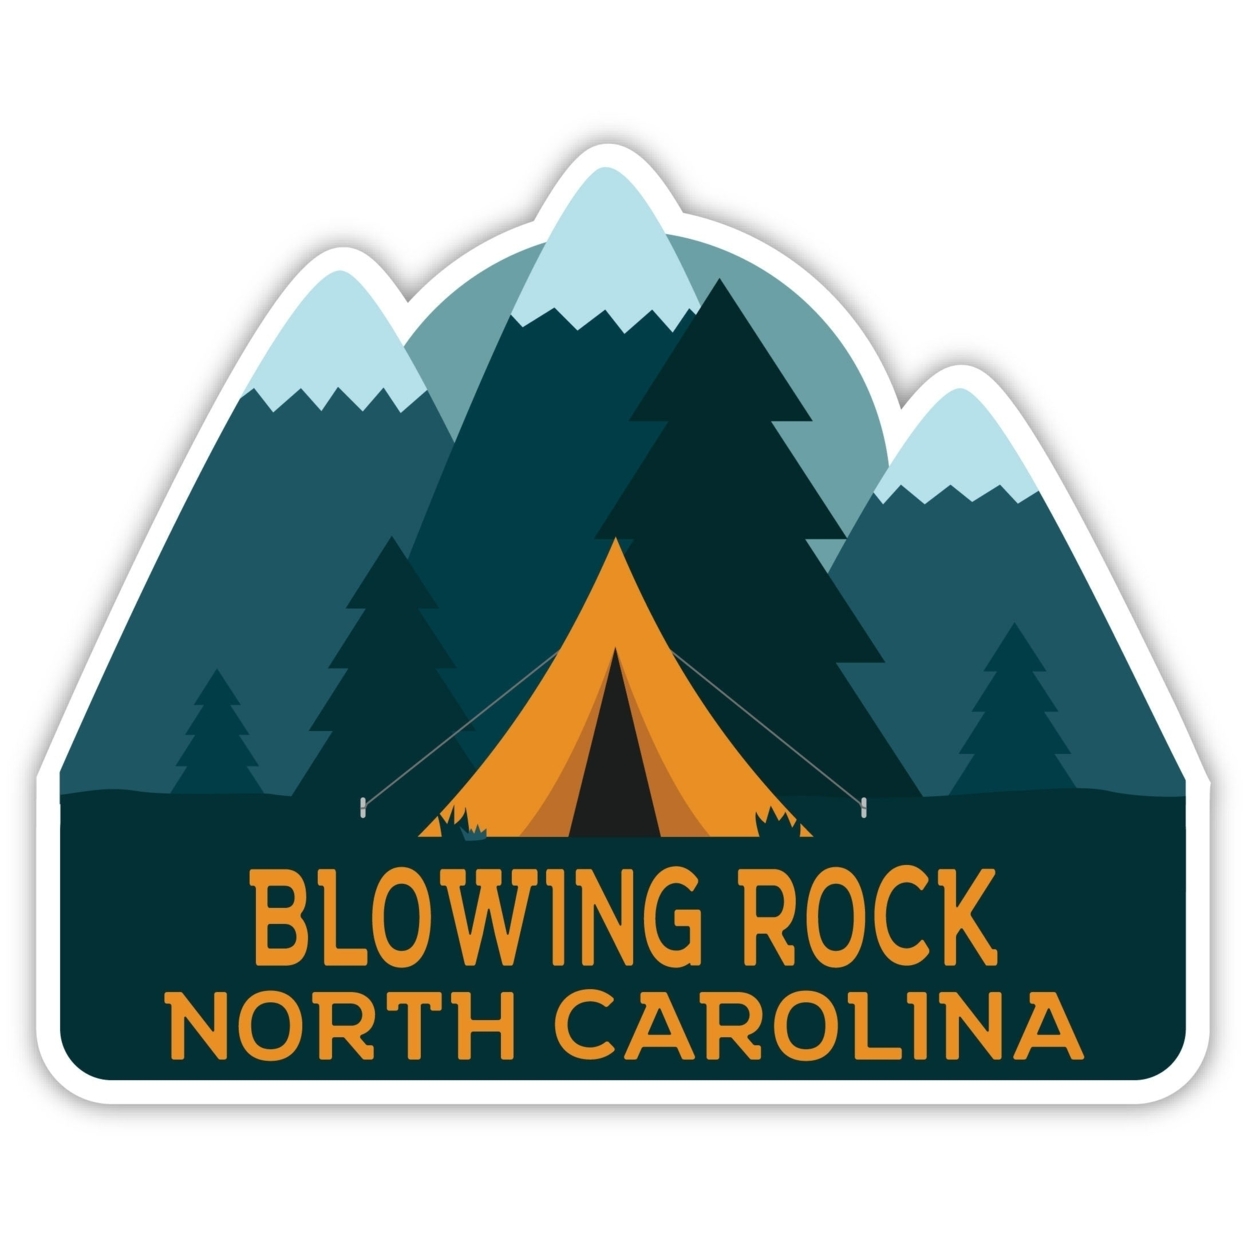 Blowing Rock North Carolina Souvenir Decorative Stickers (Choose Theme And Size) - 4-Pack, 4-Inch, Camp Life